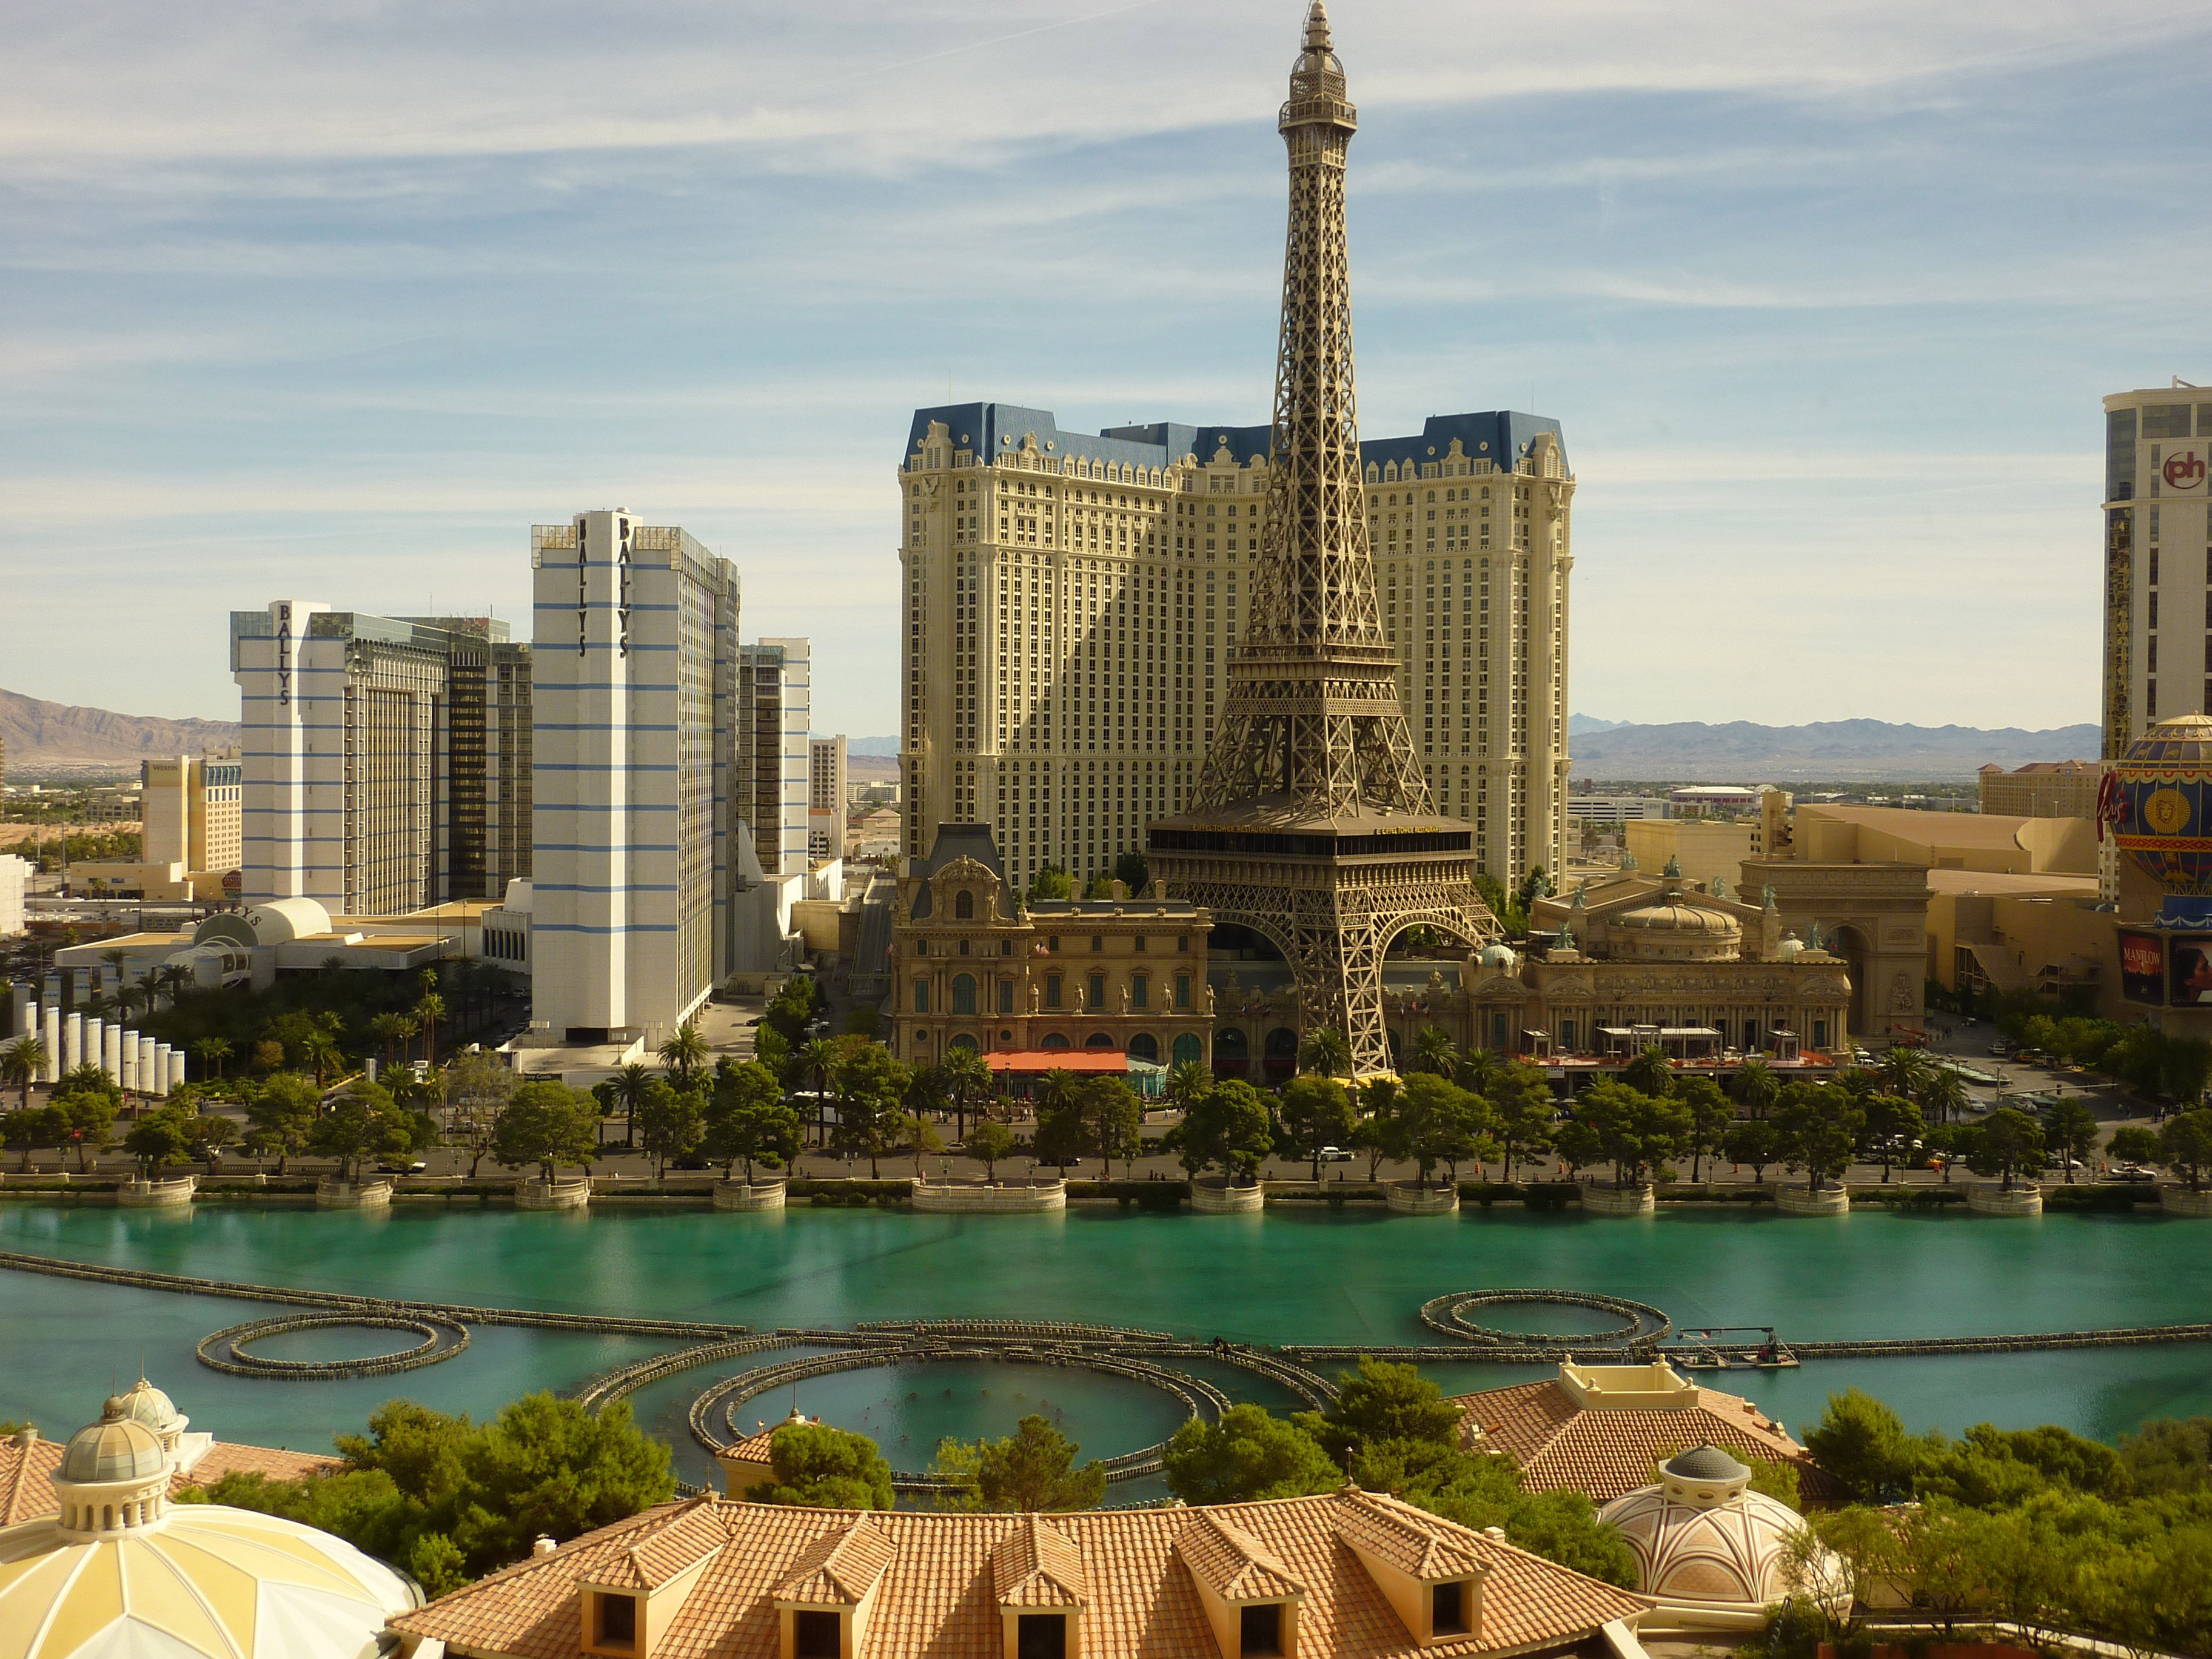 File:The hotel Paris Las Vegas as seen from the hotel The Bellagio